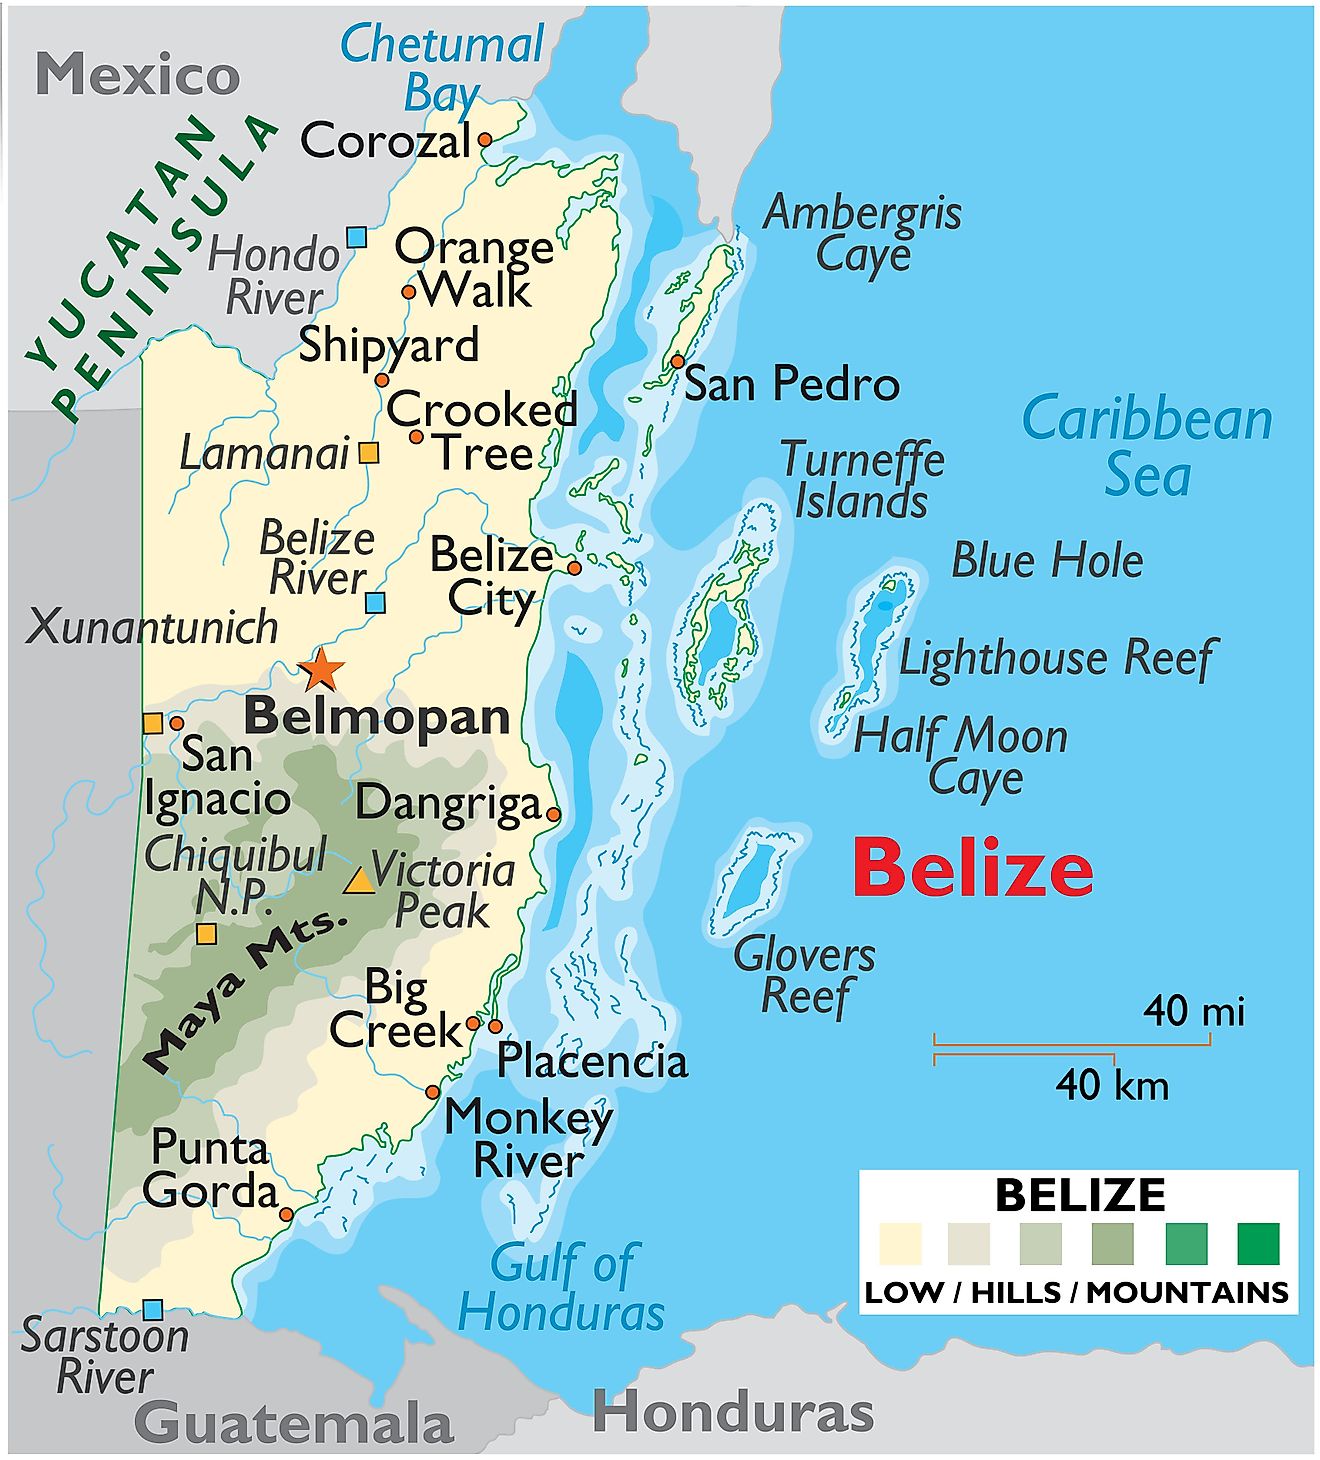 Physical Map of Belize showing relief, major rivers, the Blue Hole, offshore reefs, islands, creeks, cays, and more.